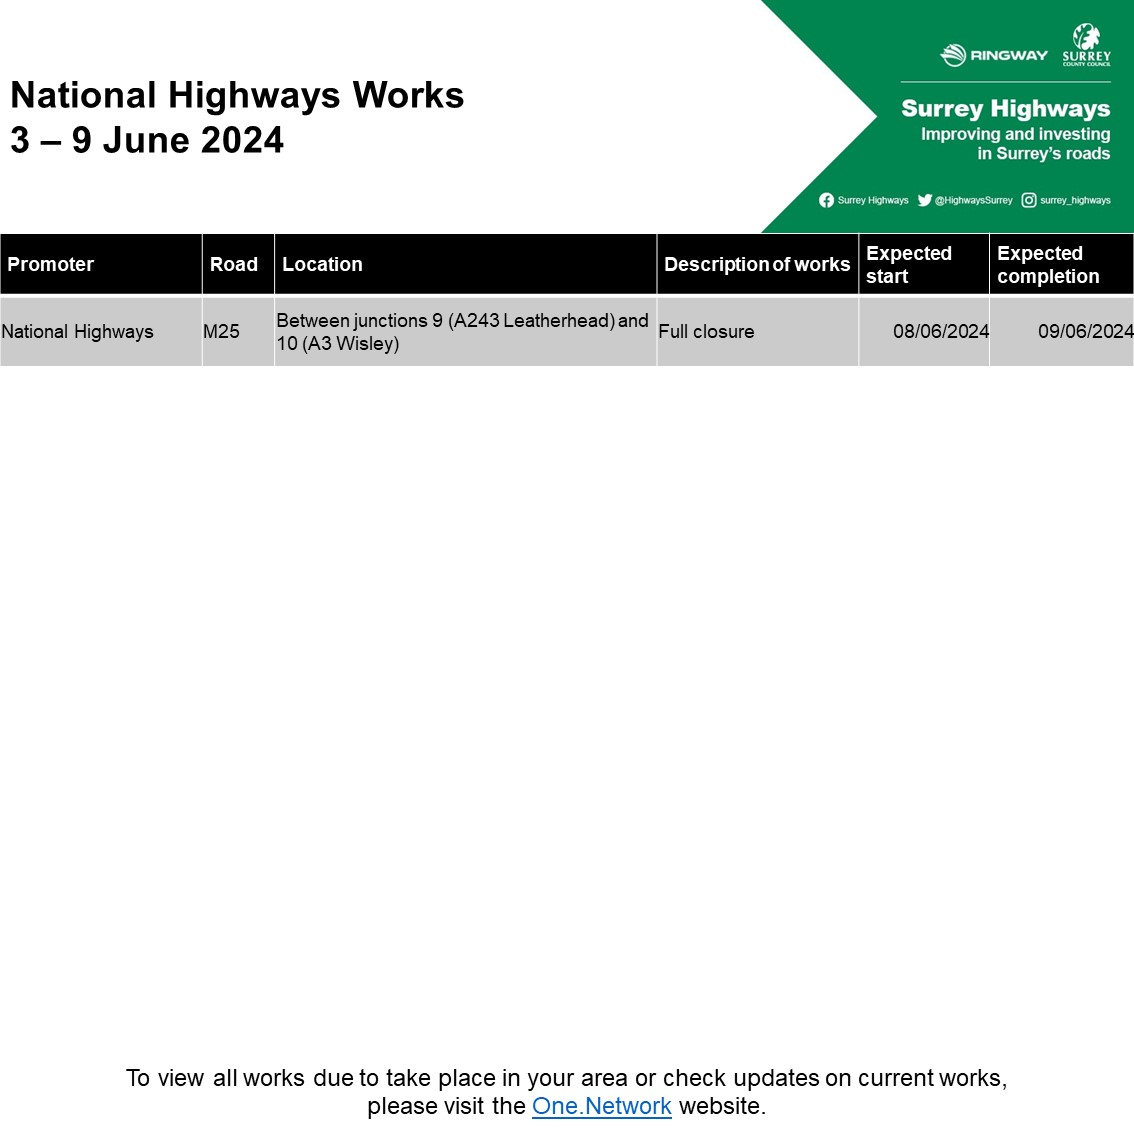 🚦 Guildford planned roadworks 🗓️ Week commencing 3/6/24 #Guildford #Normandy #Ash #AshVale #Tongham #WestClandon #Peasmarsh #Puttenham #Ripley #Send #Compton @GuildfordBC Please be aware of an upcoming M25 closure by National Highways For more see orlo.uk/olvQK